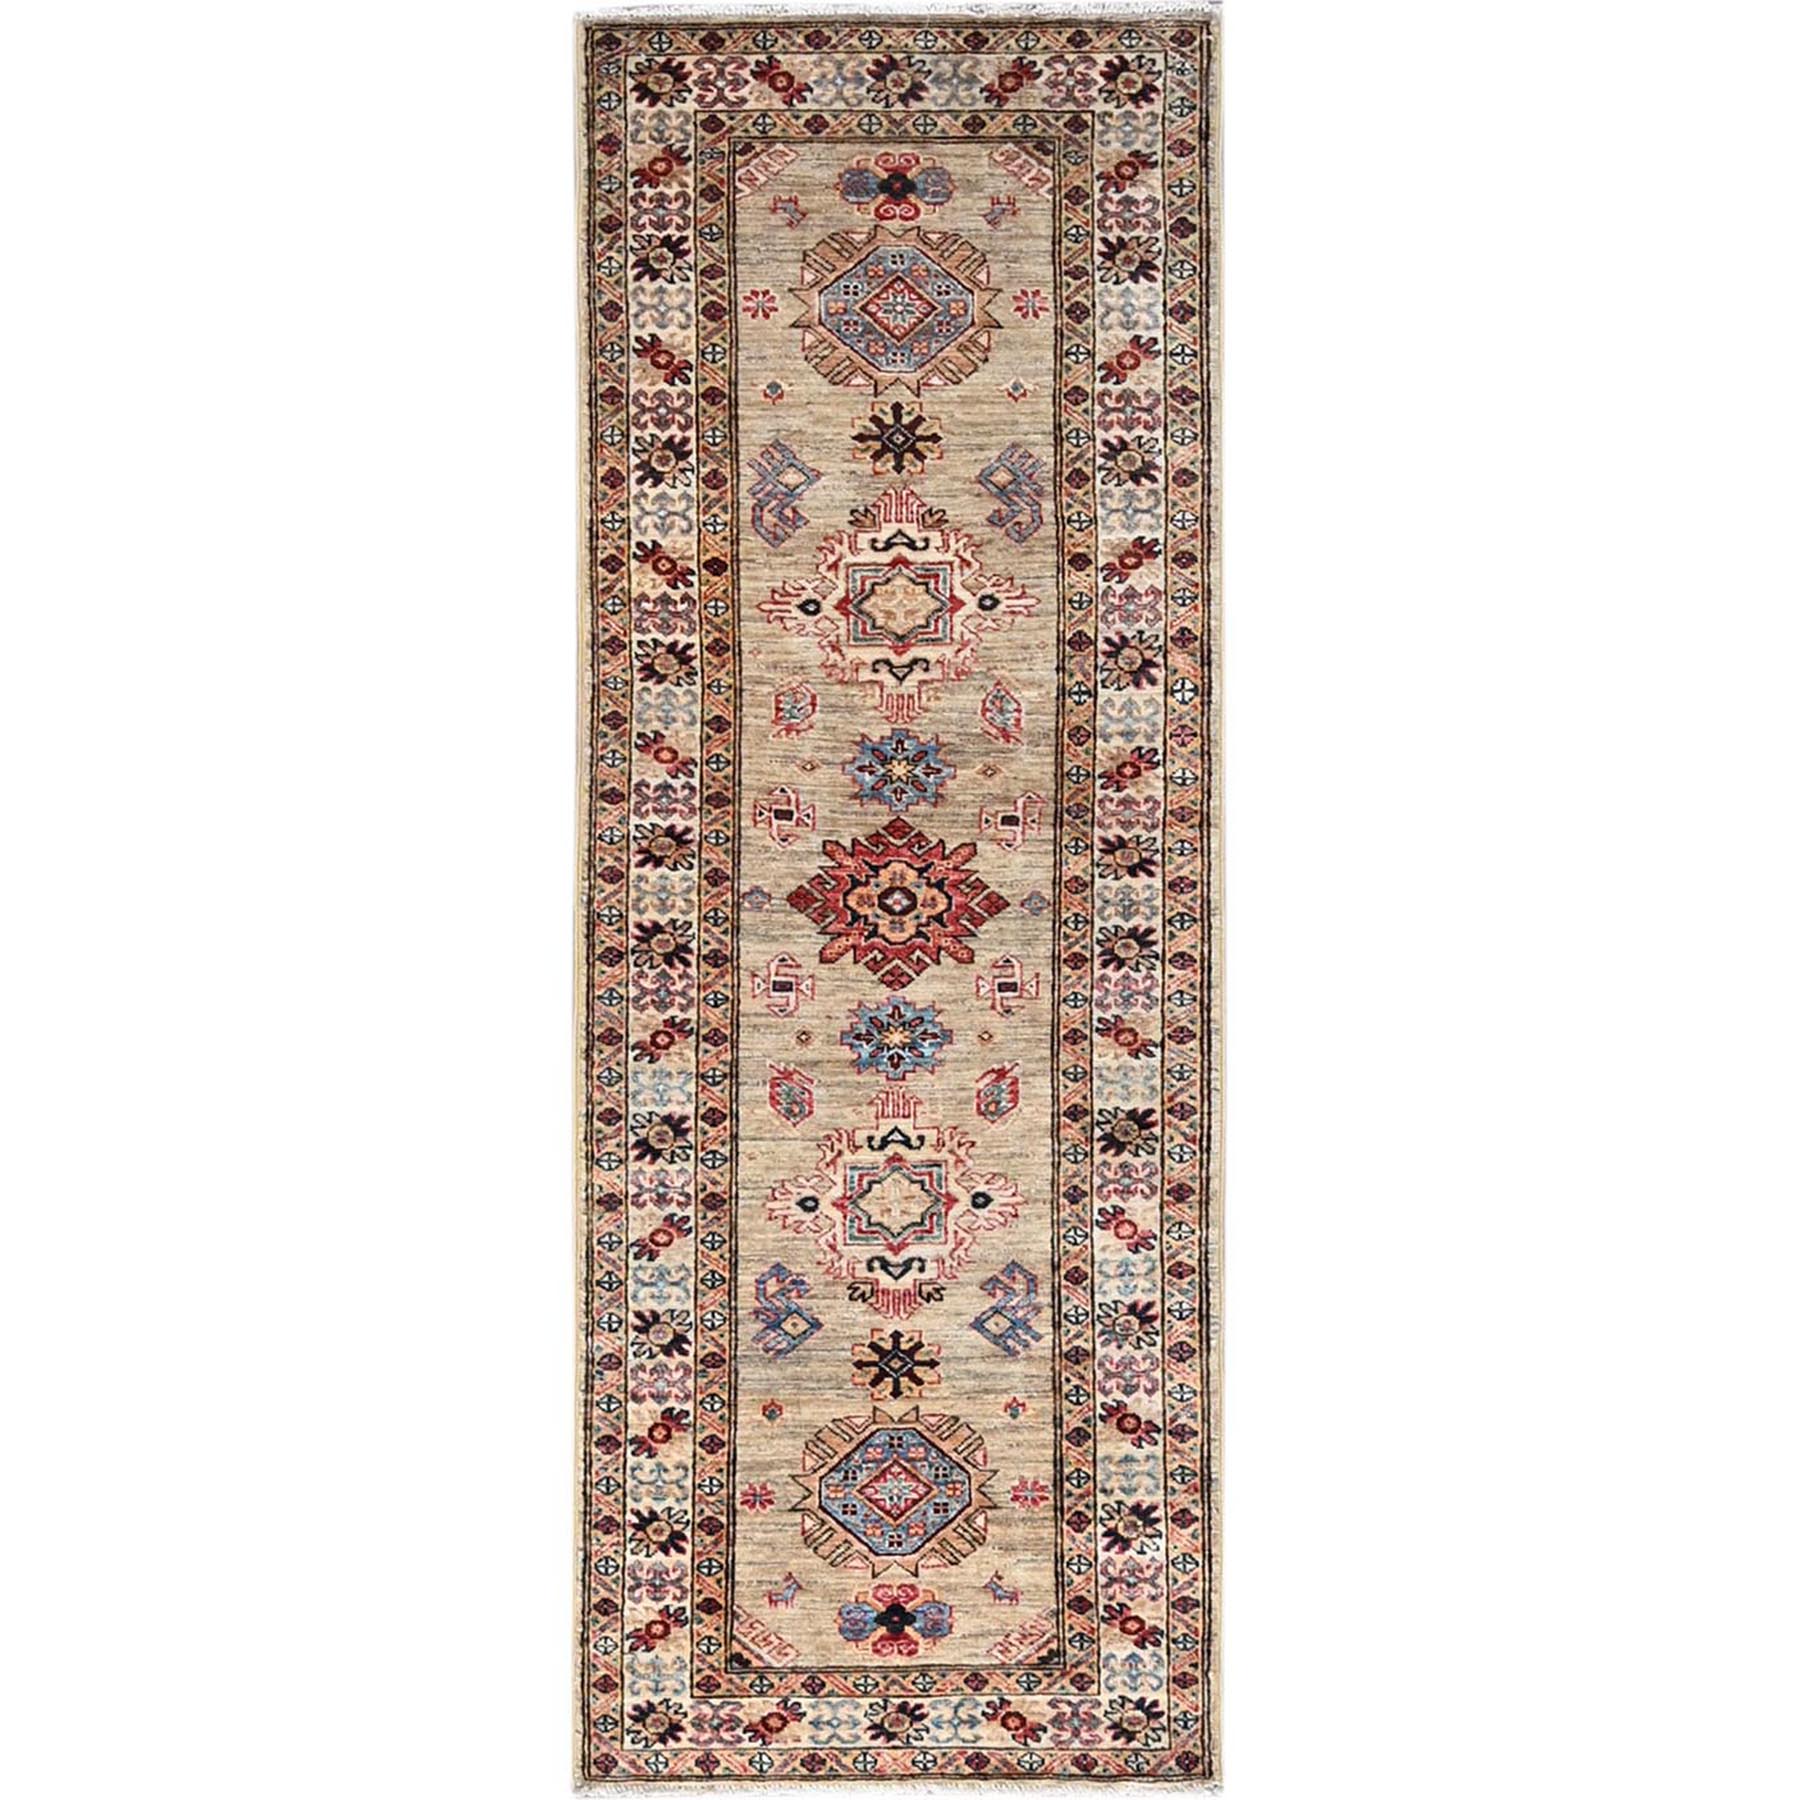 Aged White, Hand Knotted Soft Wool, Densely Woven Vegetable Dyes, Afghan Super Kazak With All Over Tribal Medallions Design, Oriental Runner Rug